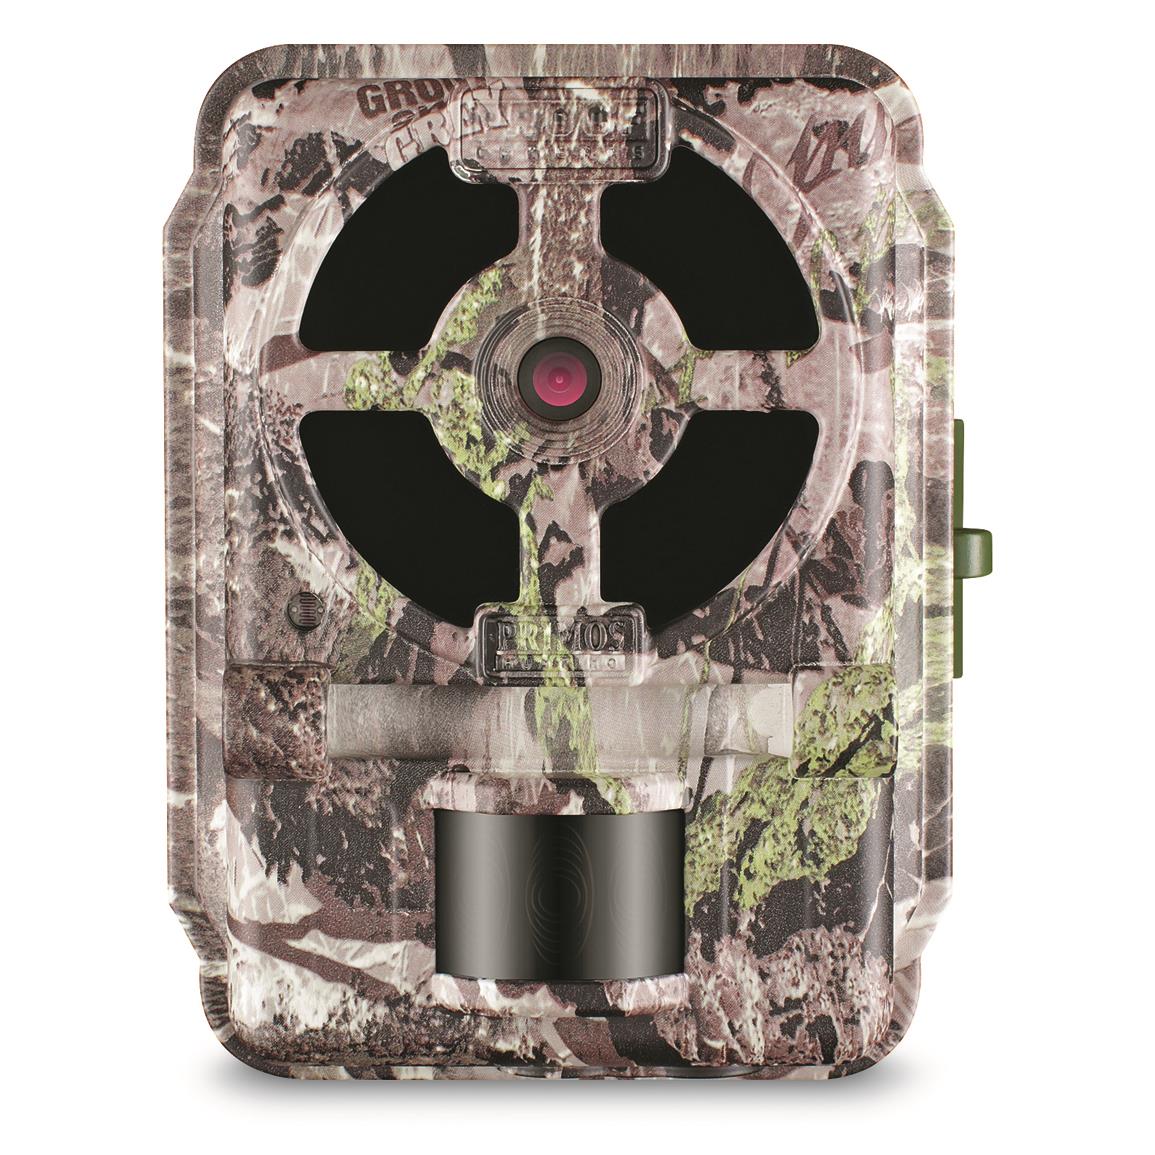 Primos Proof Gen 2 02 Trail Game Camera 16 MP 699407 Game Trail 